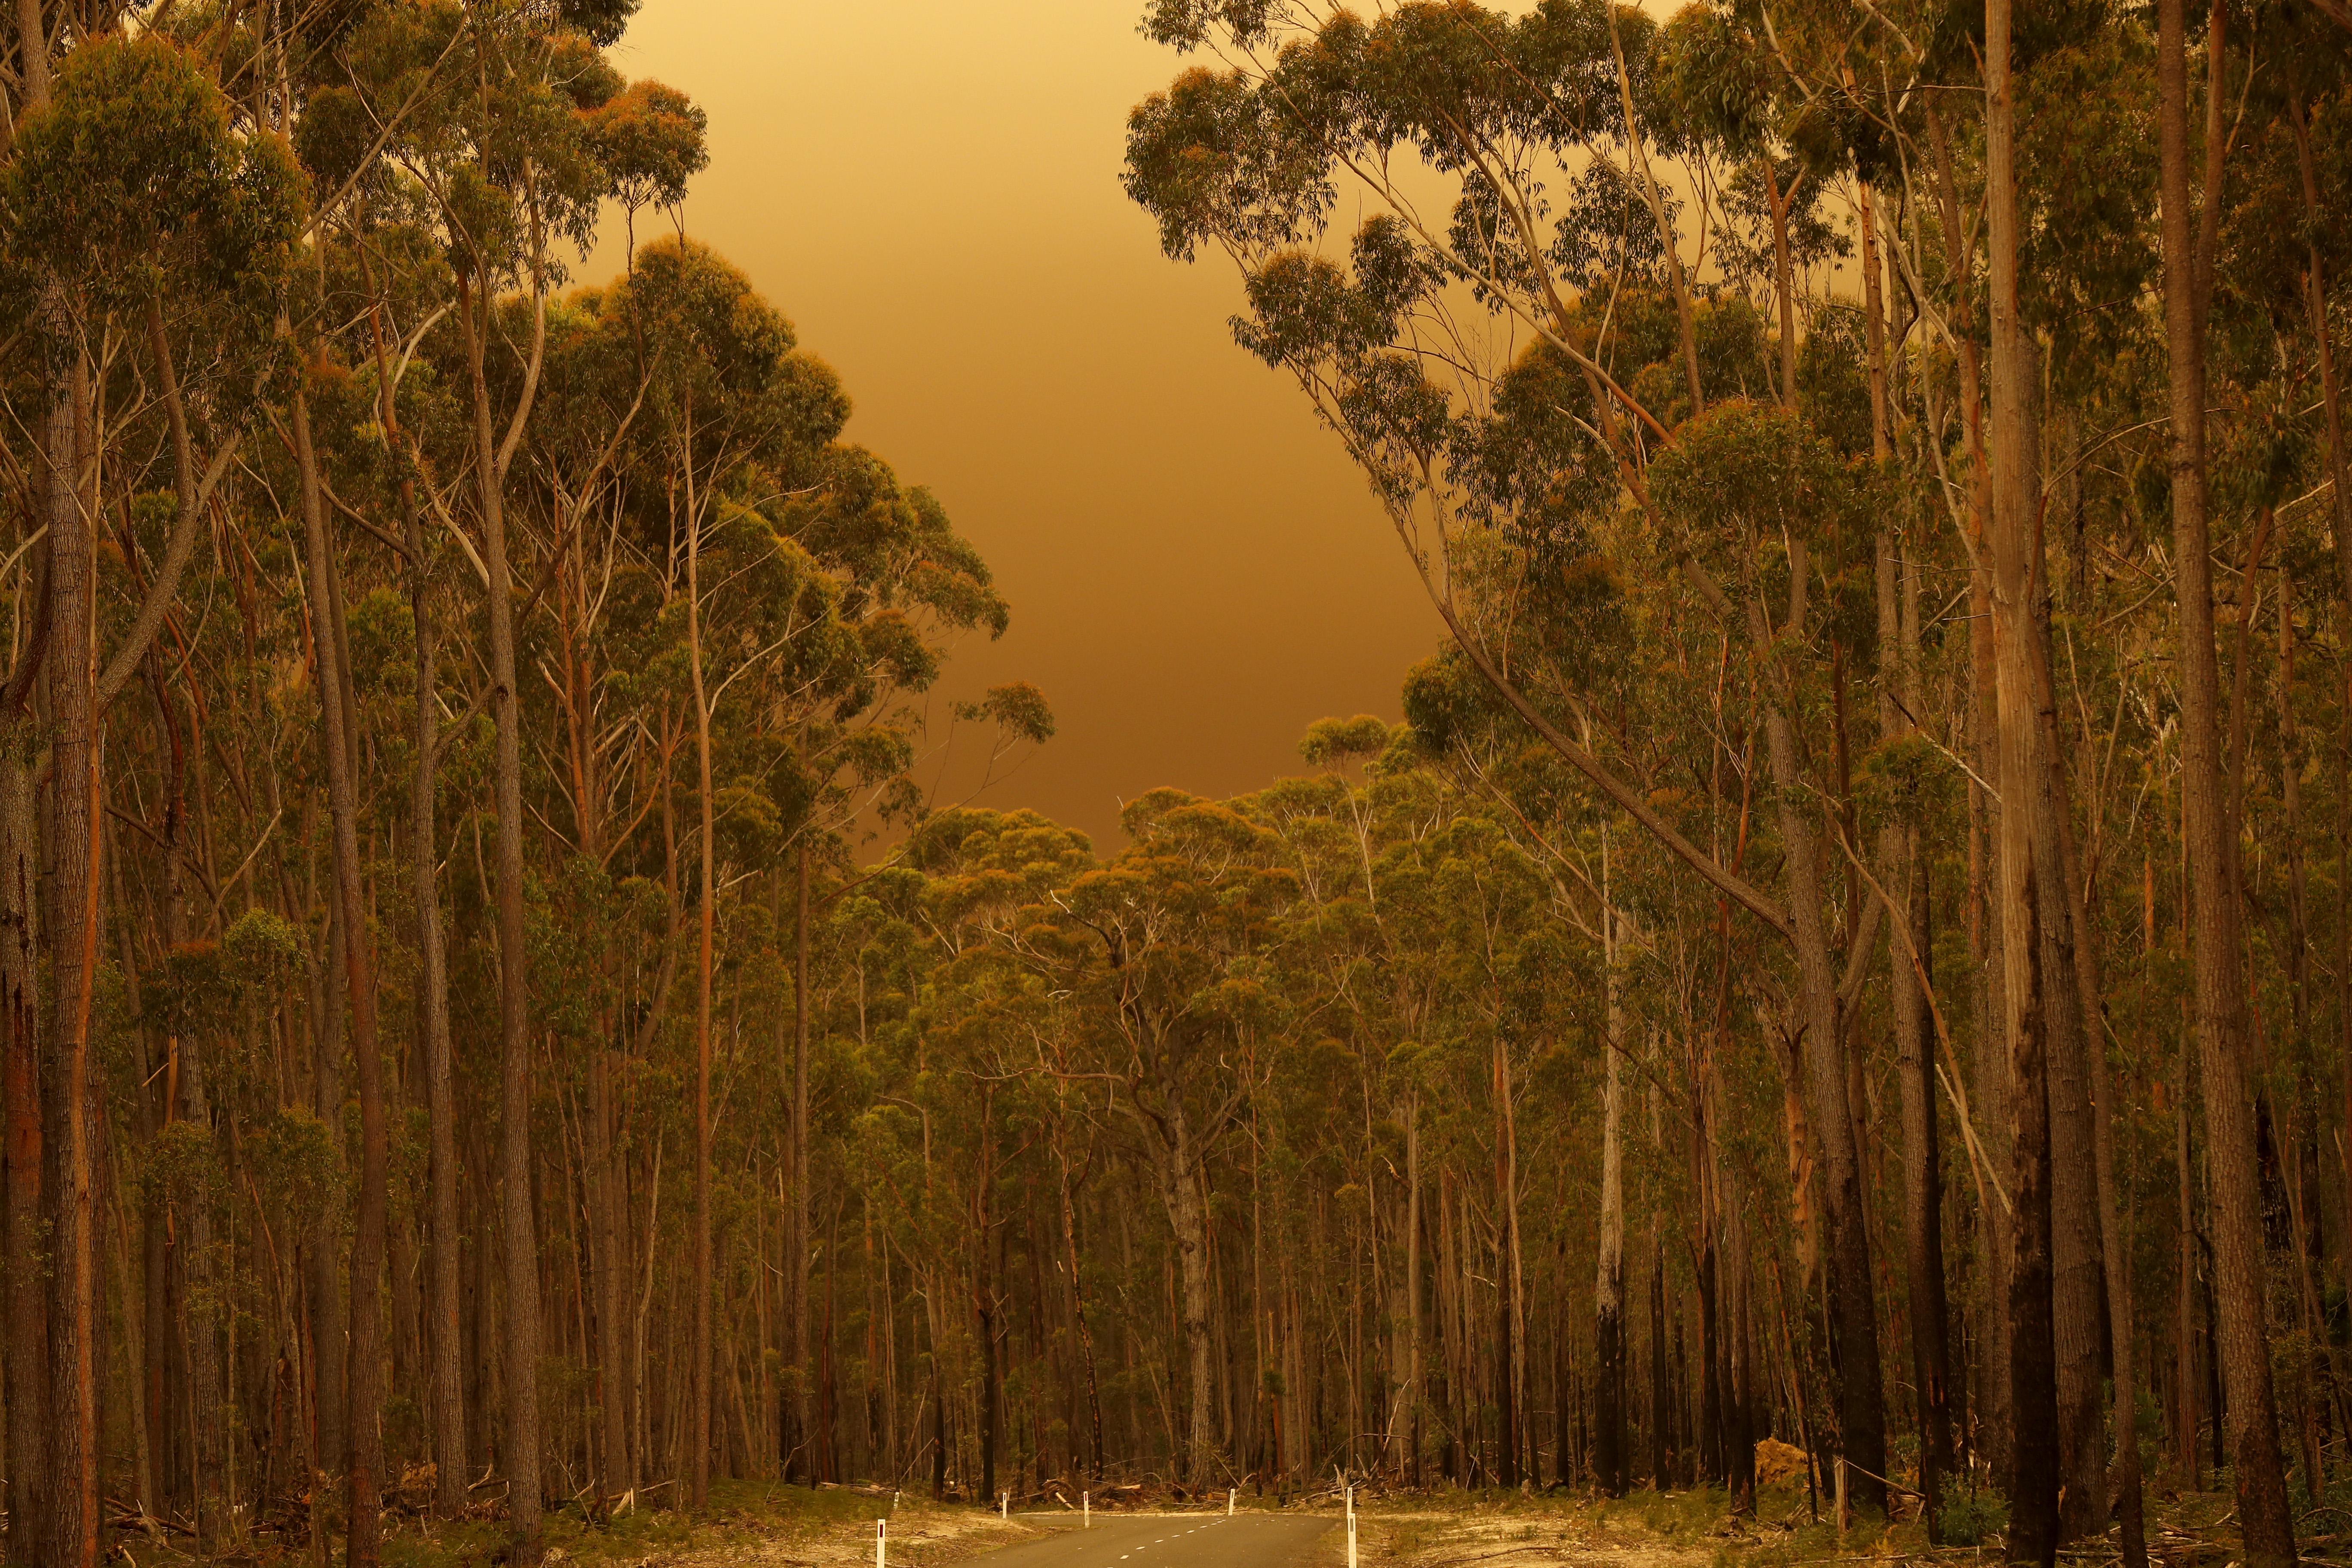 A road in a forested area is cast in a hazy light.